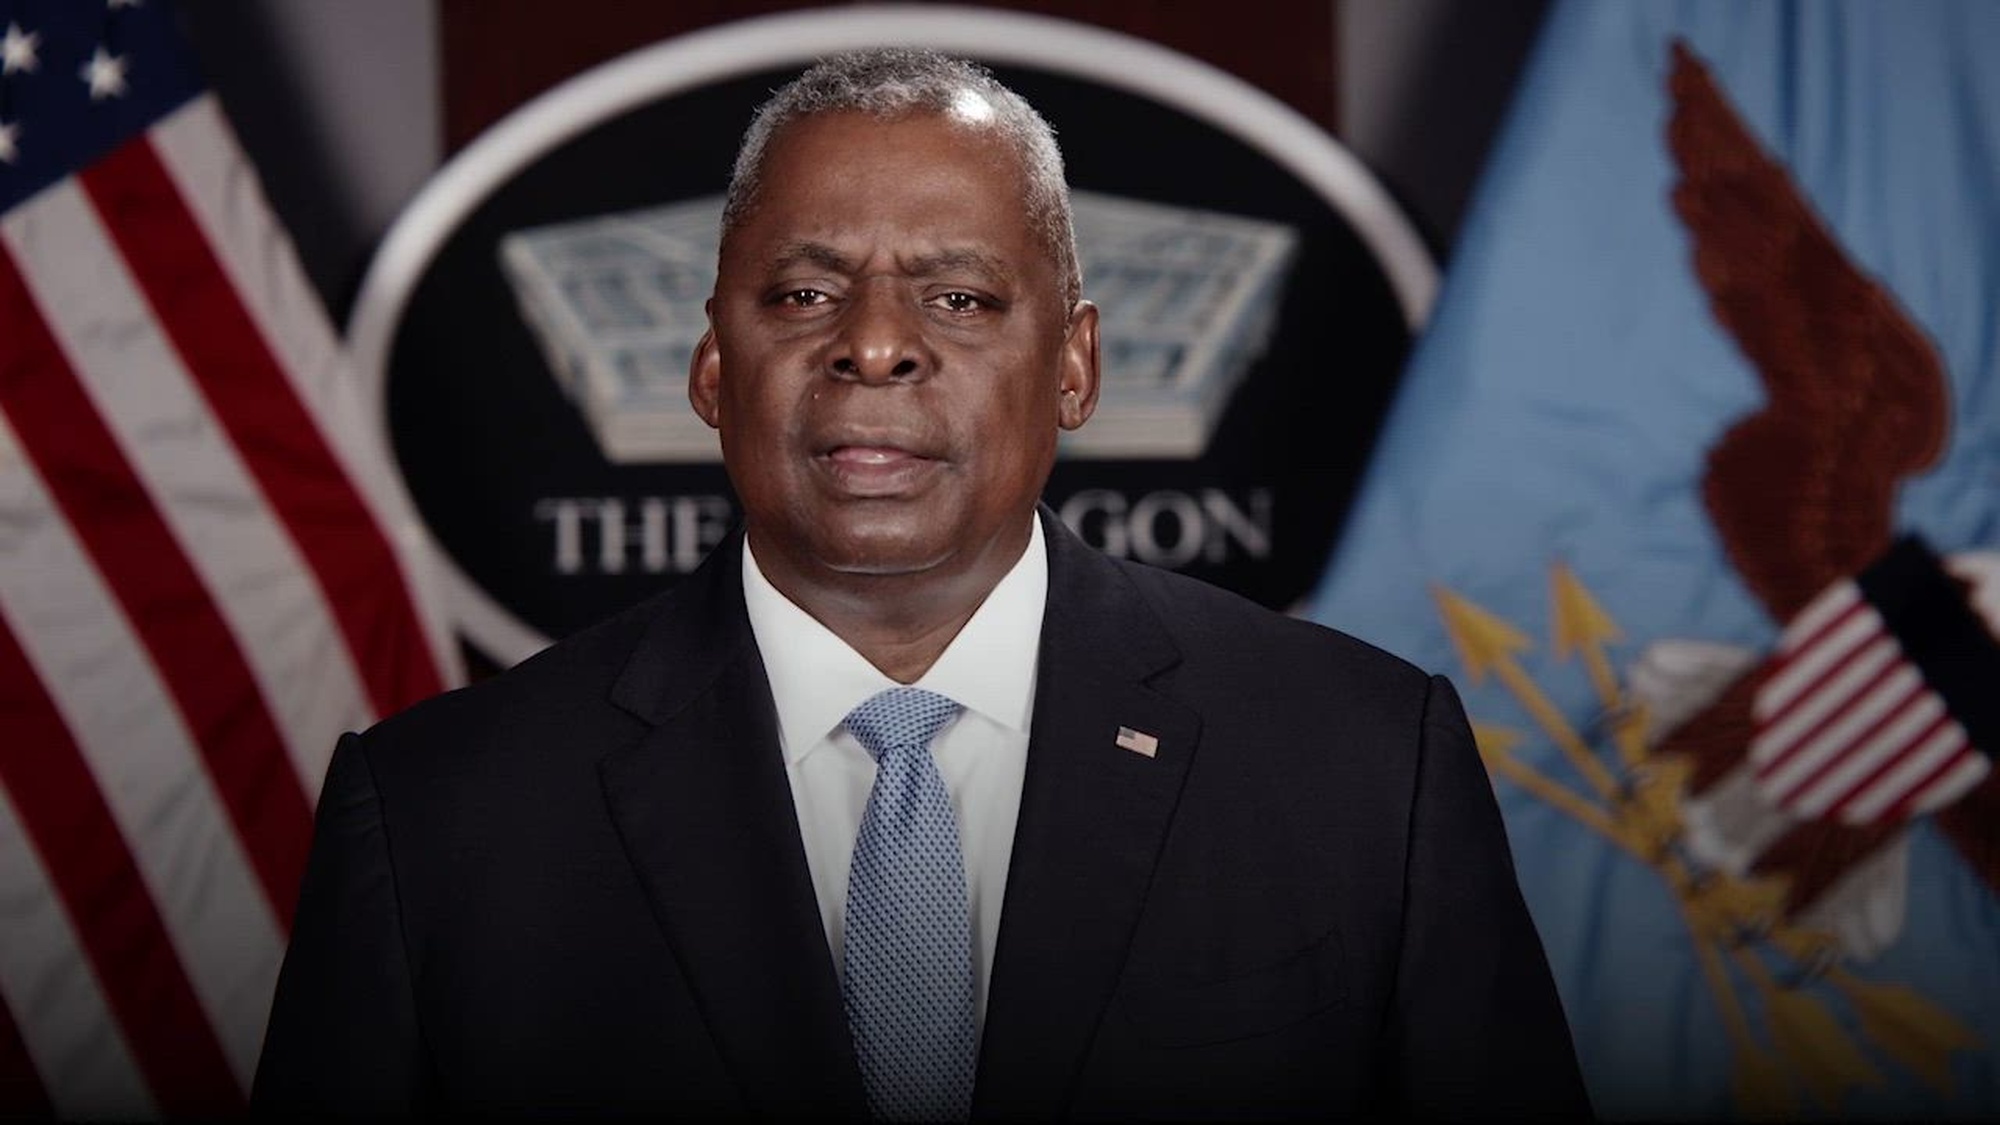 Secretary of Defense Lloyd J. Austin III marks the anniversary of the desegregation of the U.S. armed forces and discusses the impact it's had over the last 75 years.